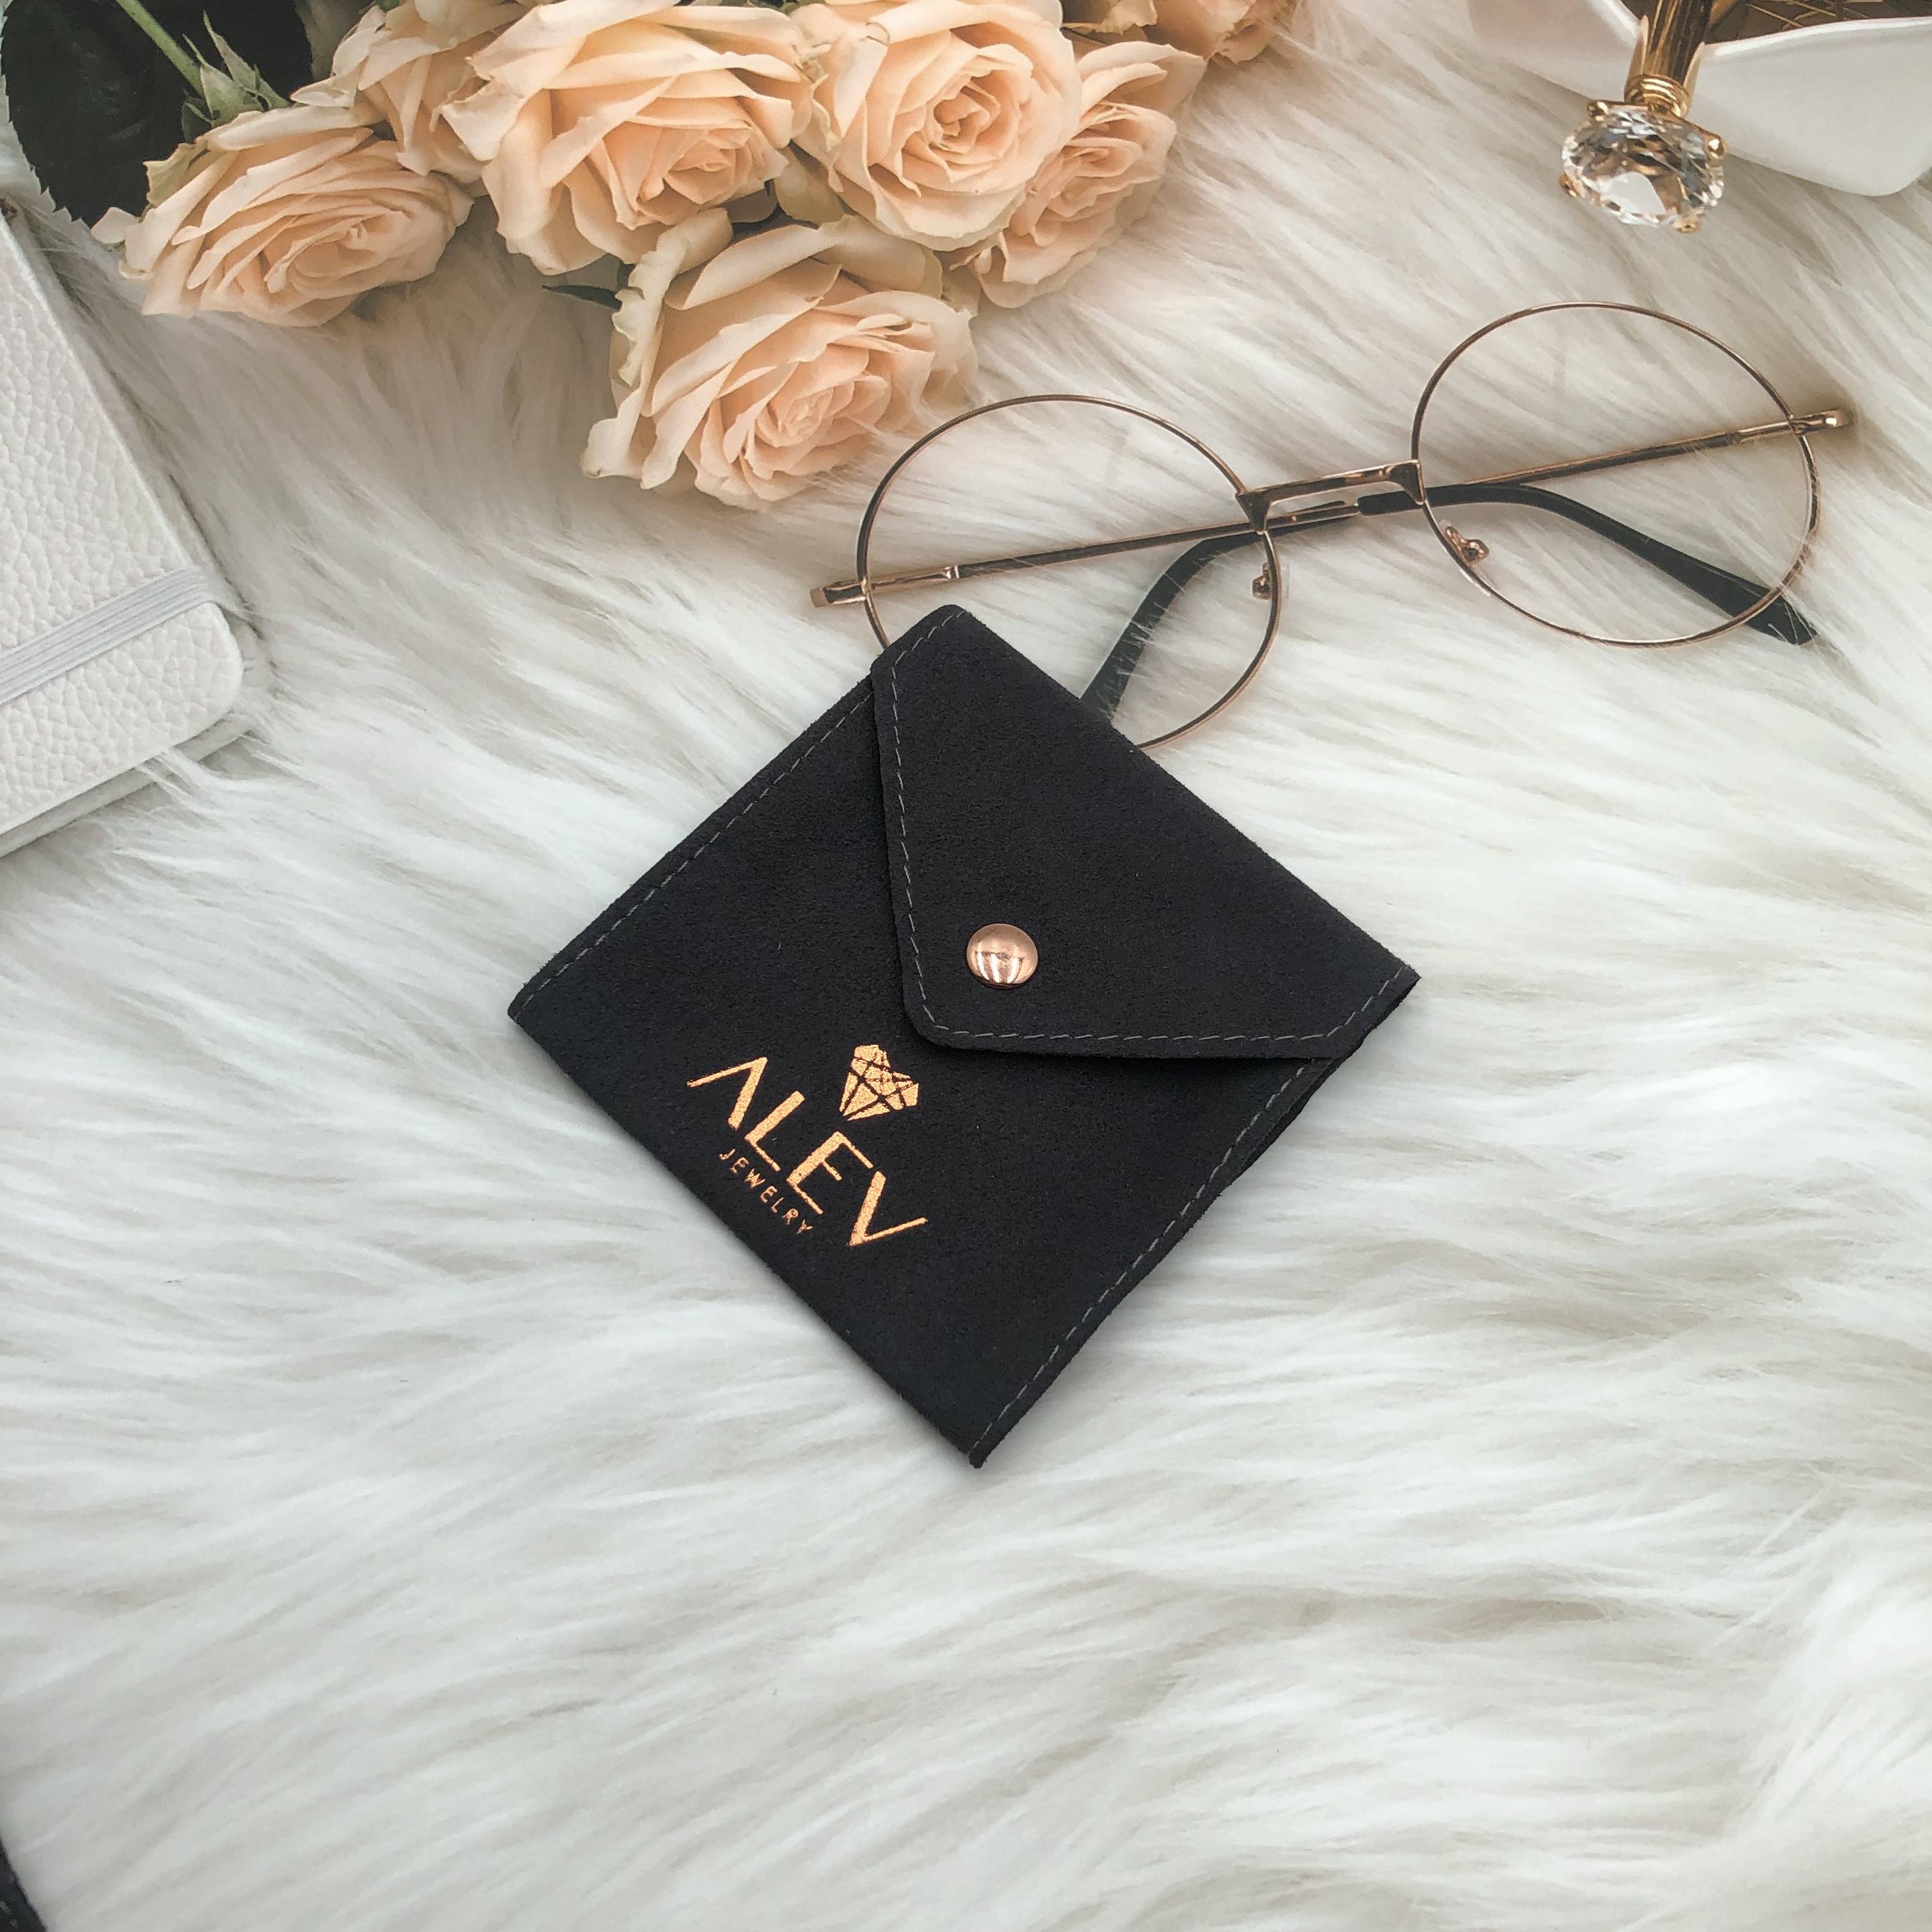 Yaodao wholesale custom printed suede envelope white jewelry pouch and packaging gift bag with button